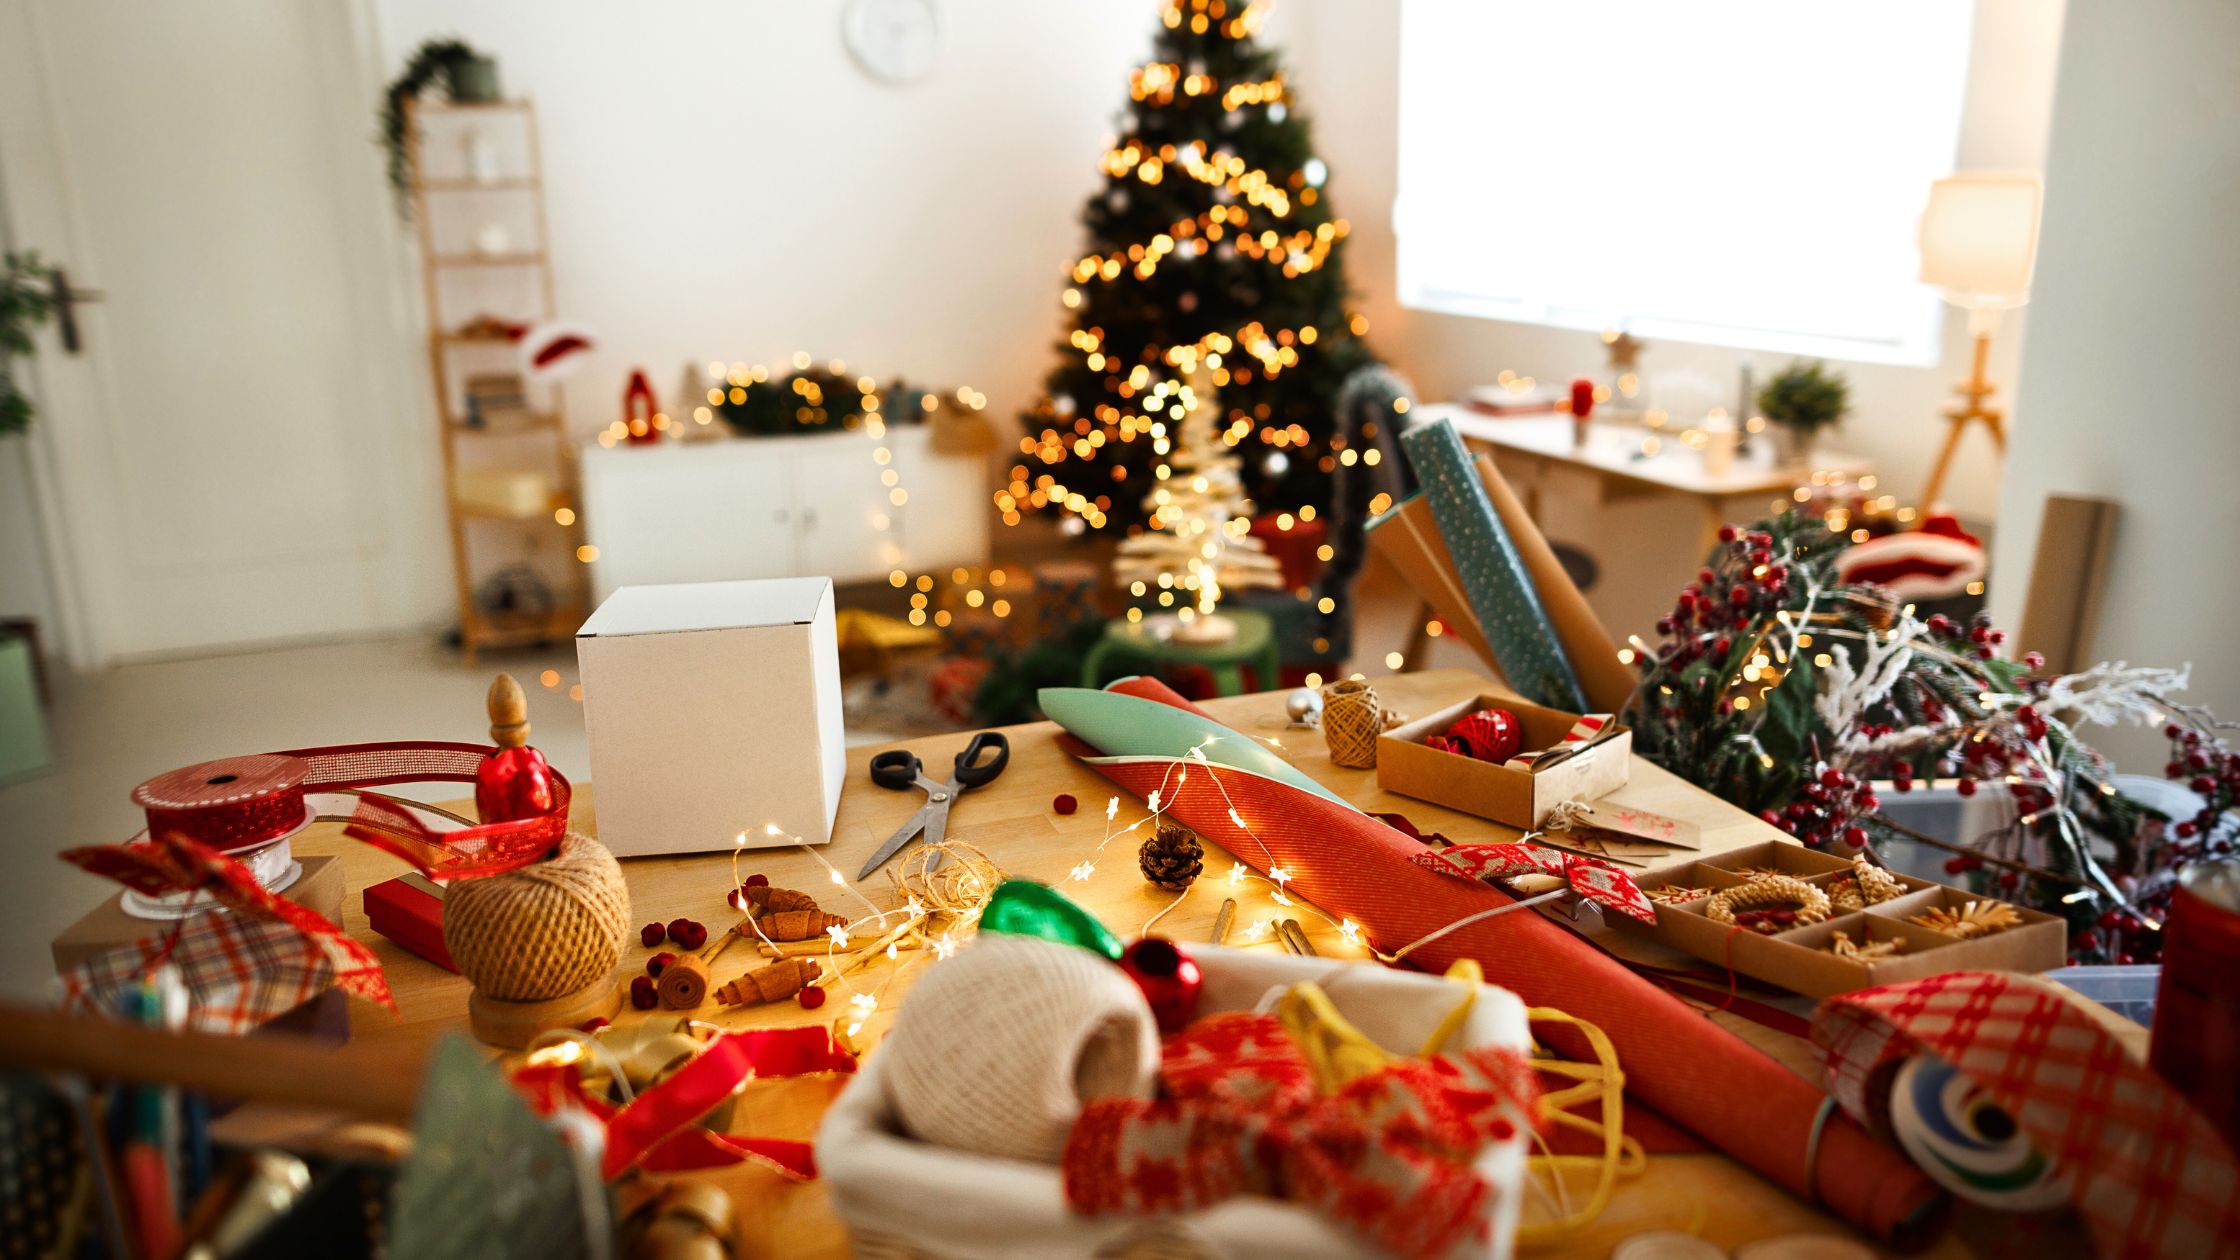 A living room is in disarray, with wrapping paper and decorations everywhere. Learn how to avoid holiday clutter.